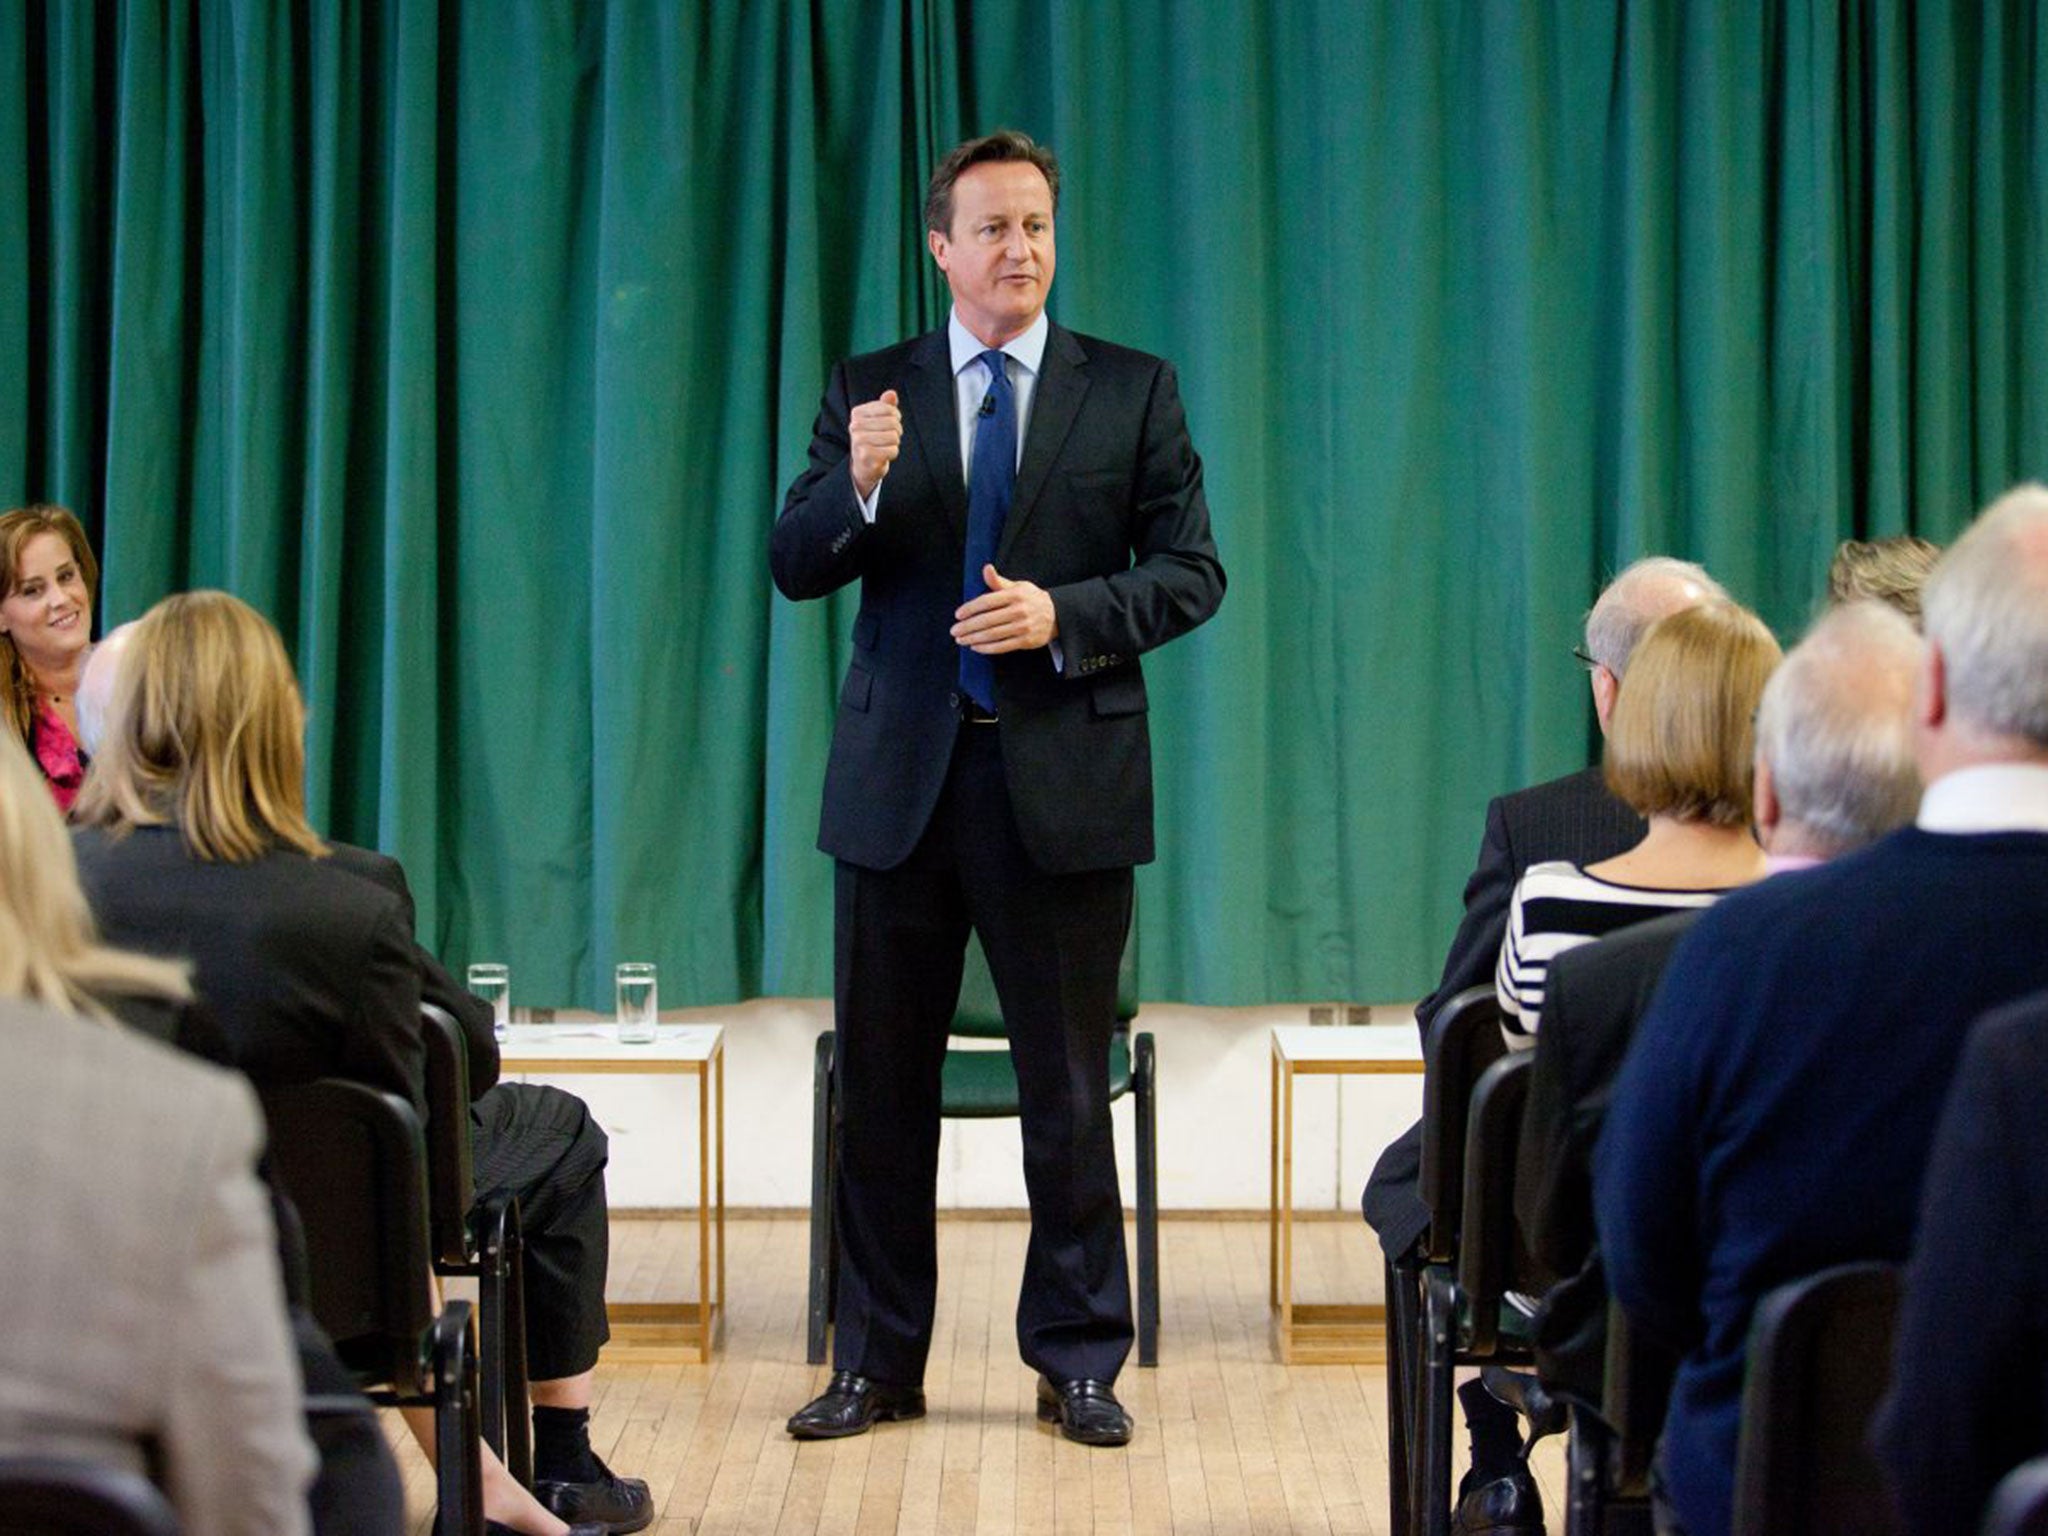 Prime Minister David Cameron introduces one of the Conservative Party's two applicant councillors, Kelly Tolhurst, far left, for her nomination in the upcoming Rochester and Strood by-election